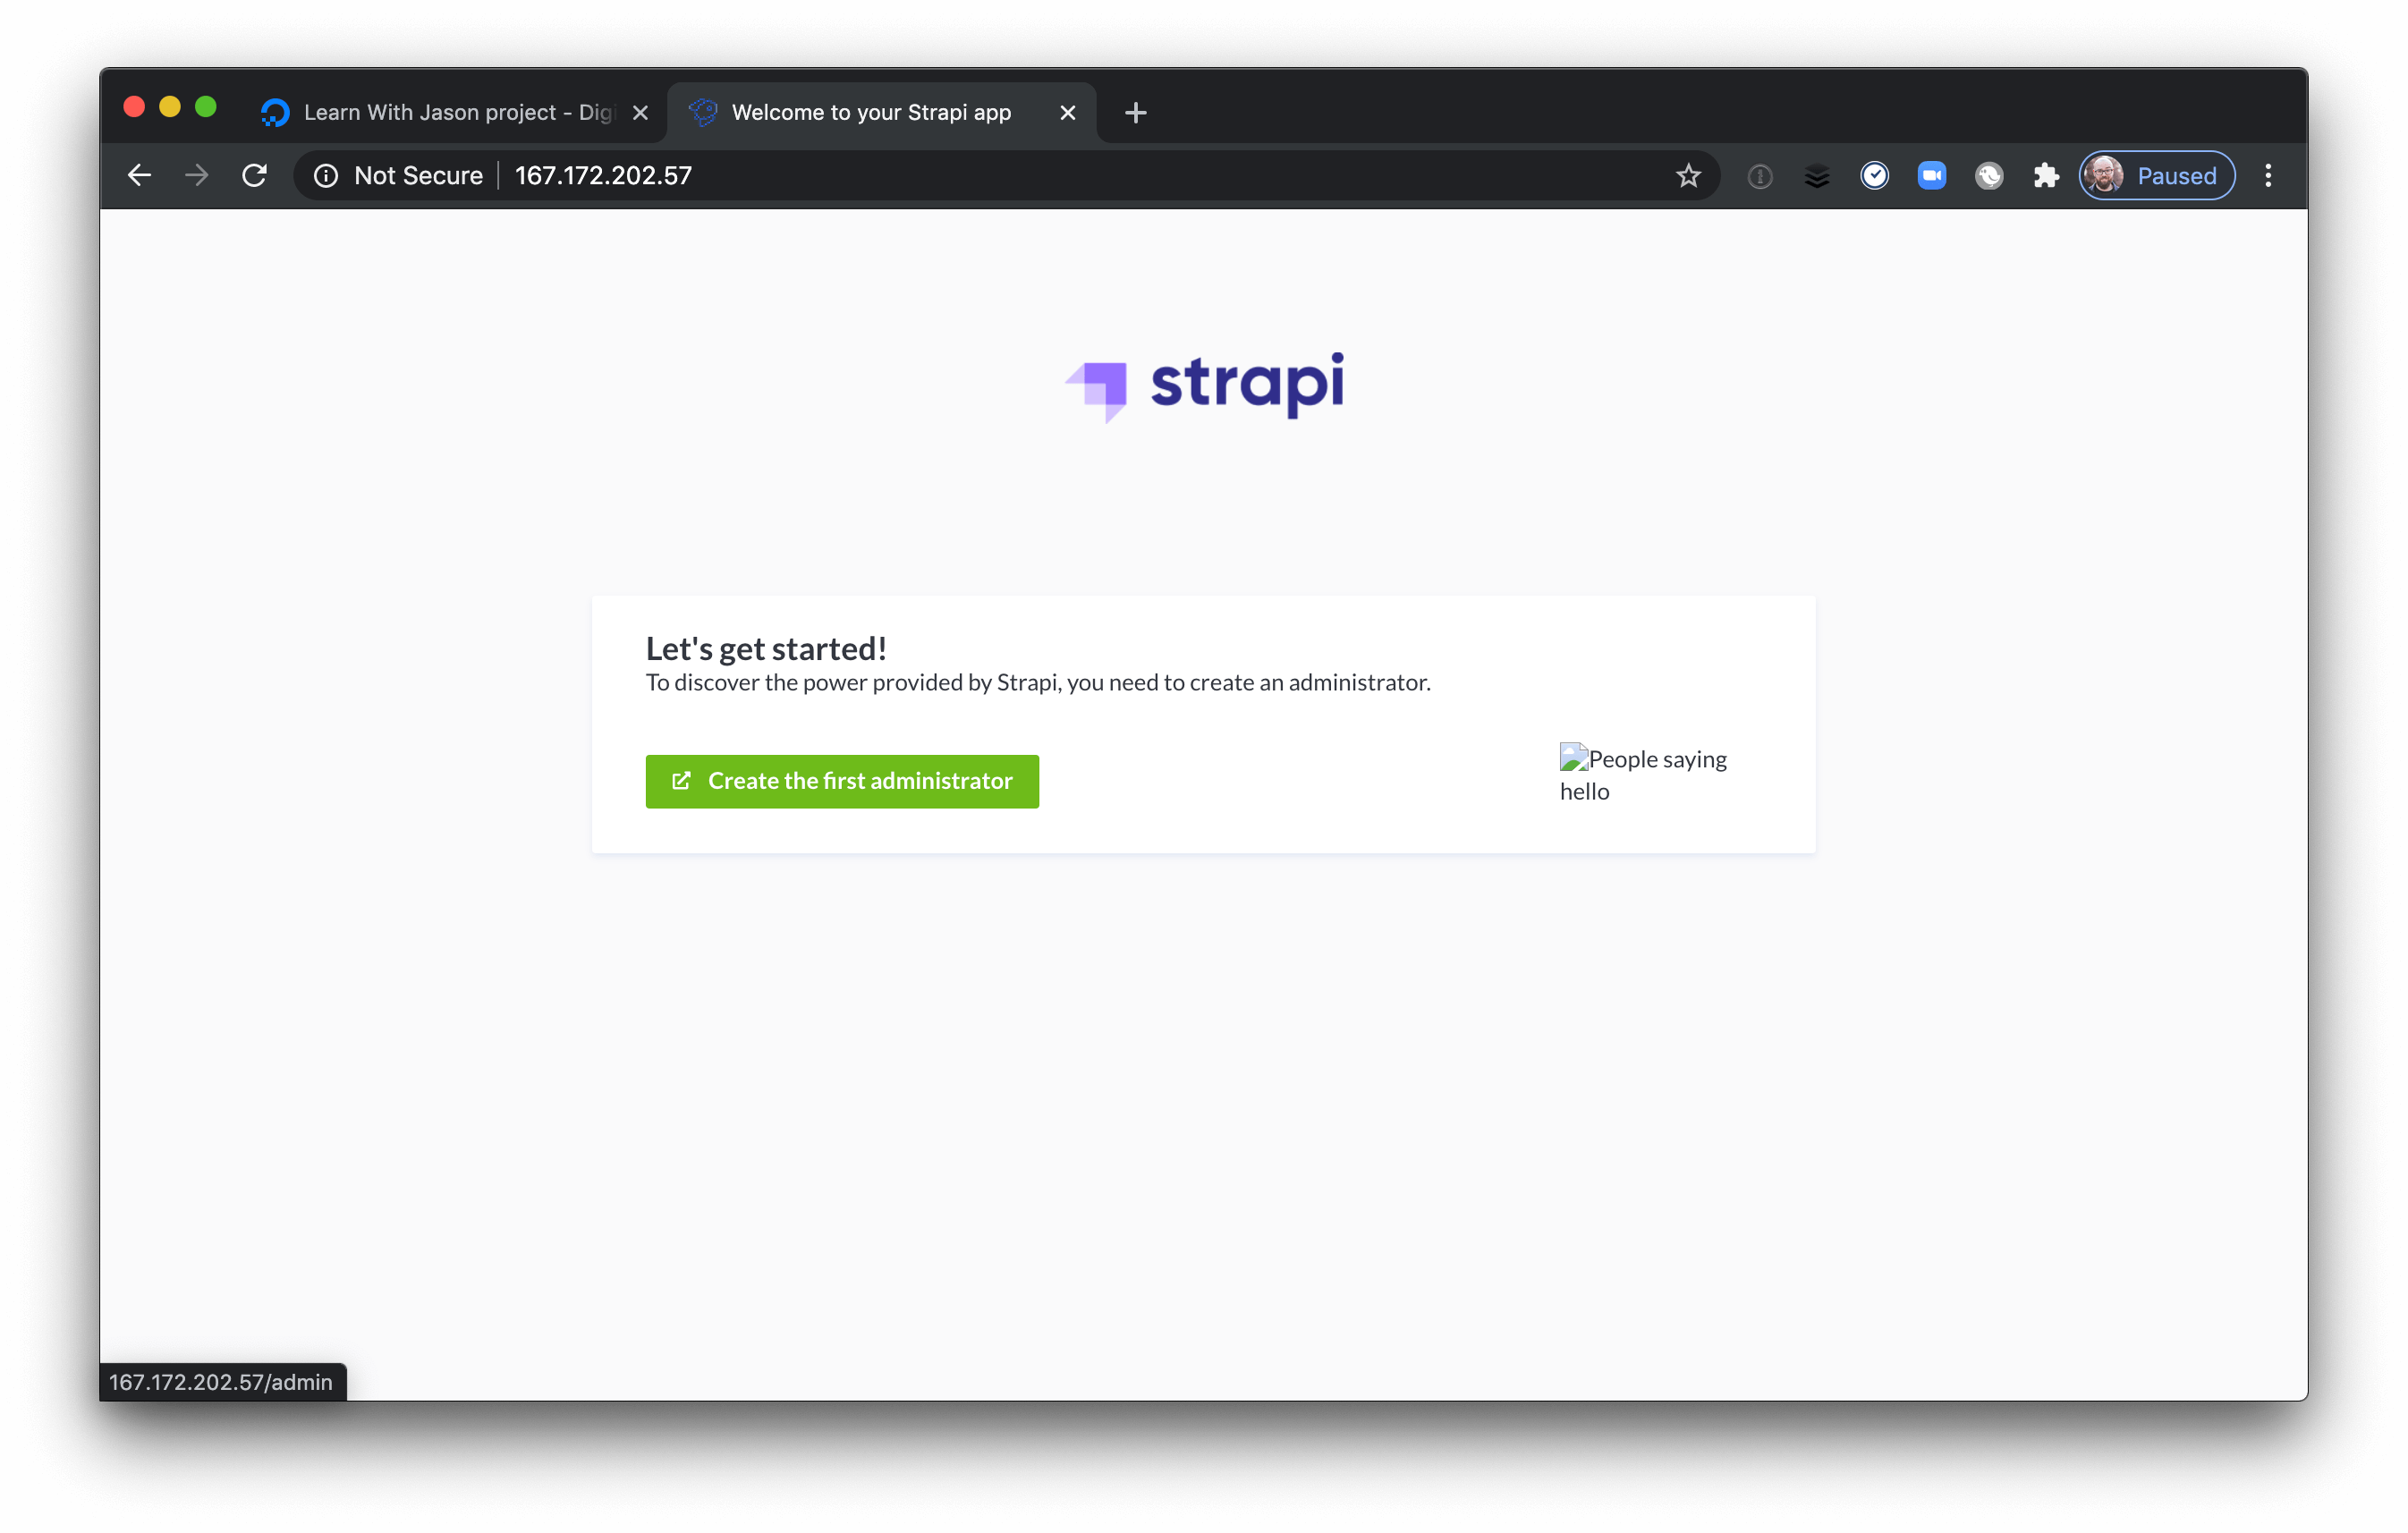 Strapi’s getting started page.